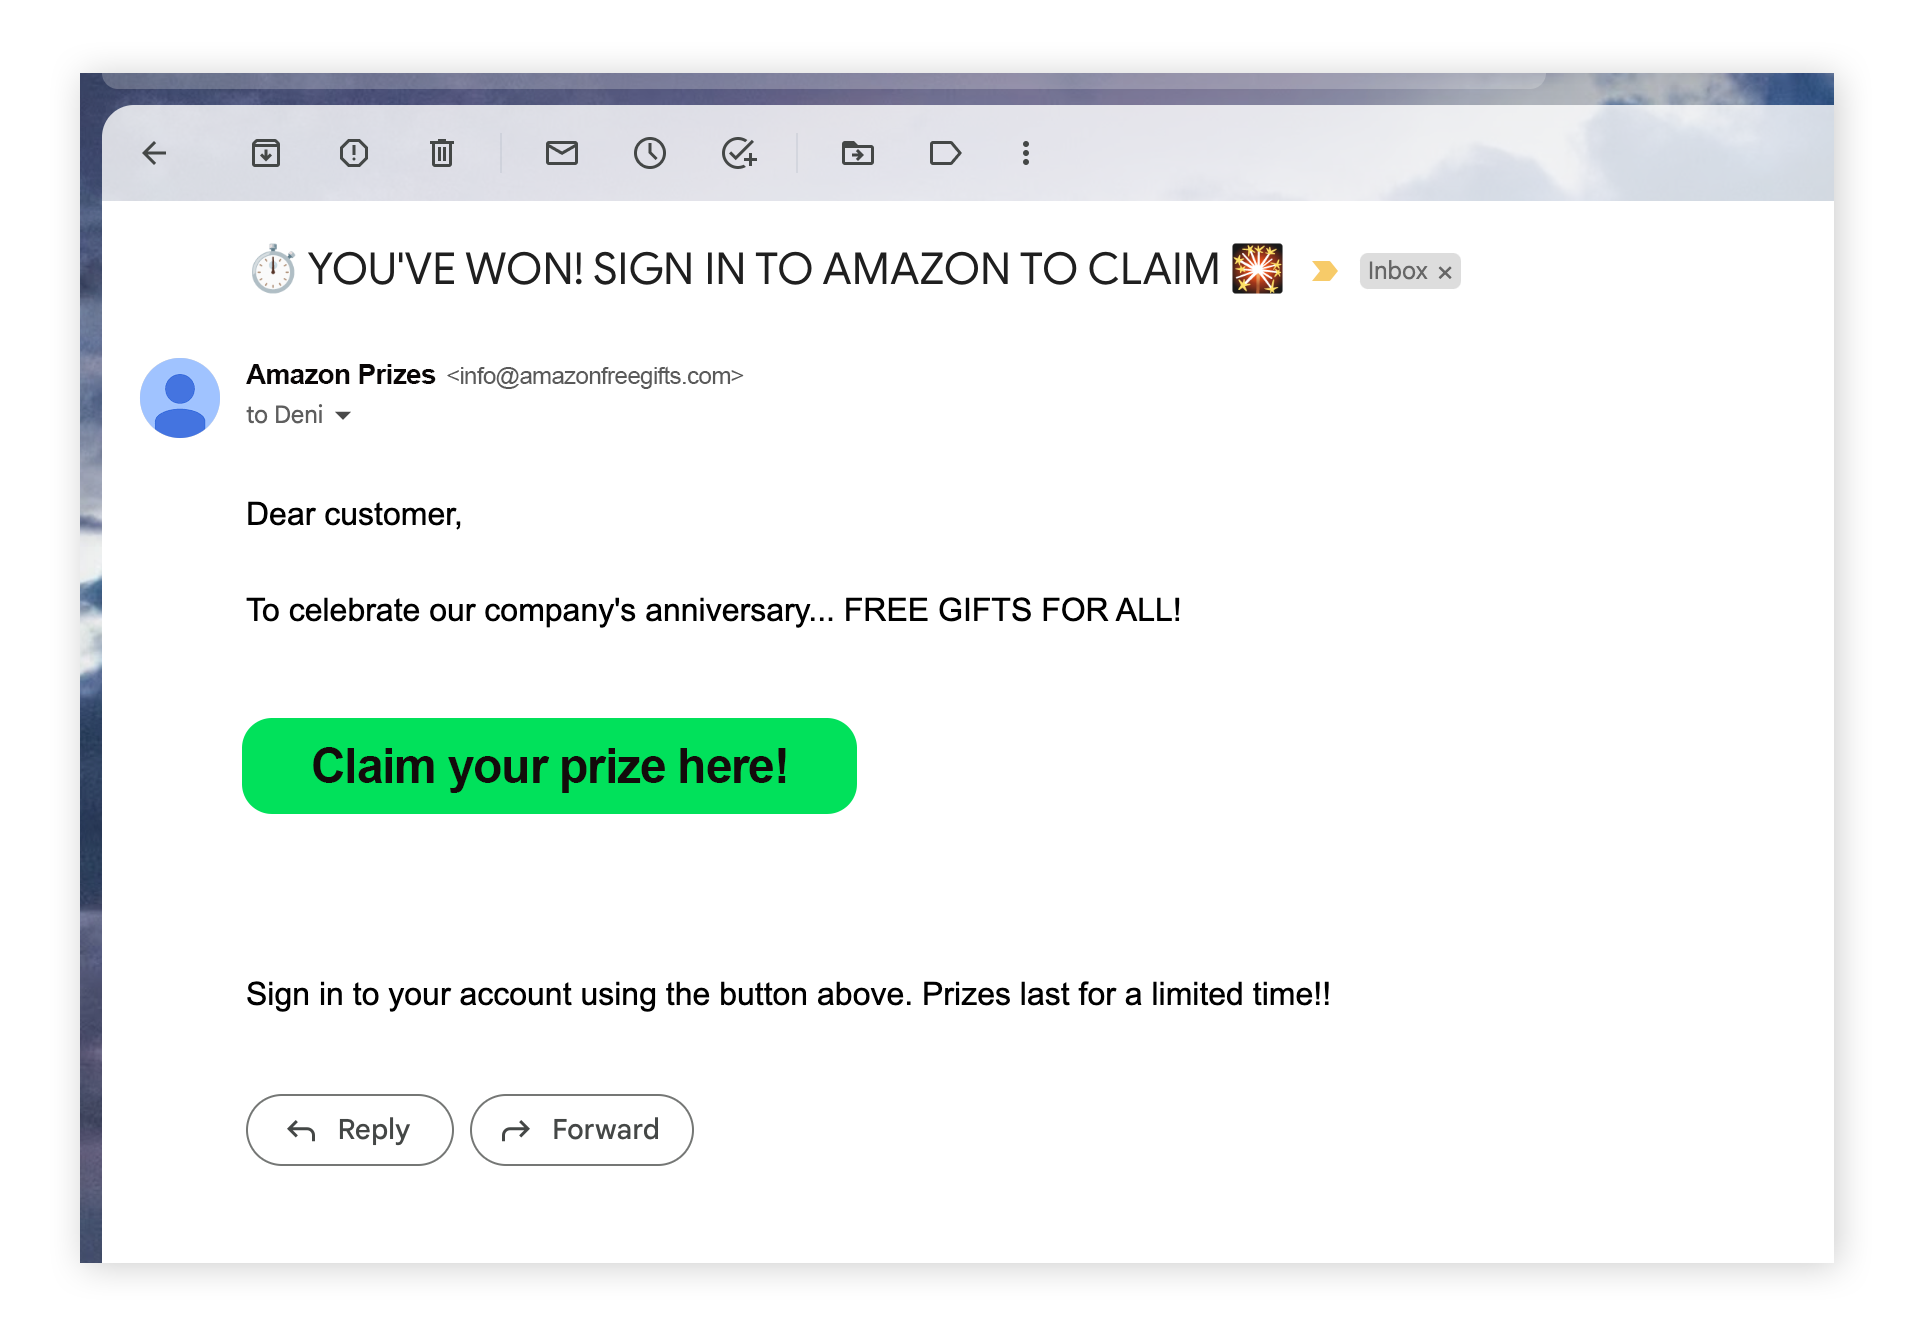 Amazon phishing scams commonly promise you've won a prize to get you to click a malicious link.